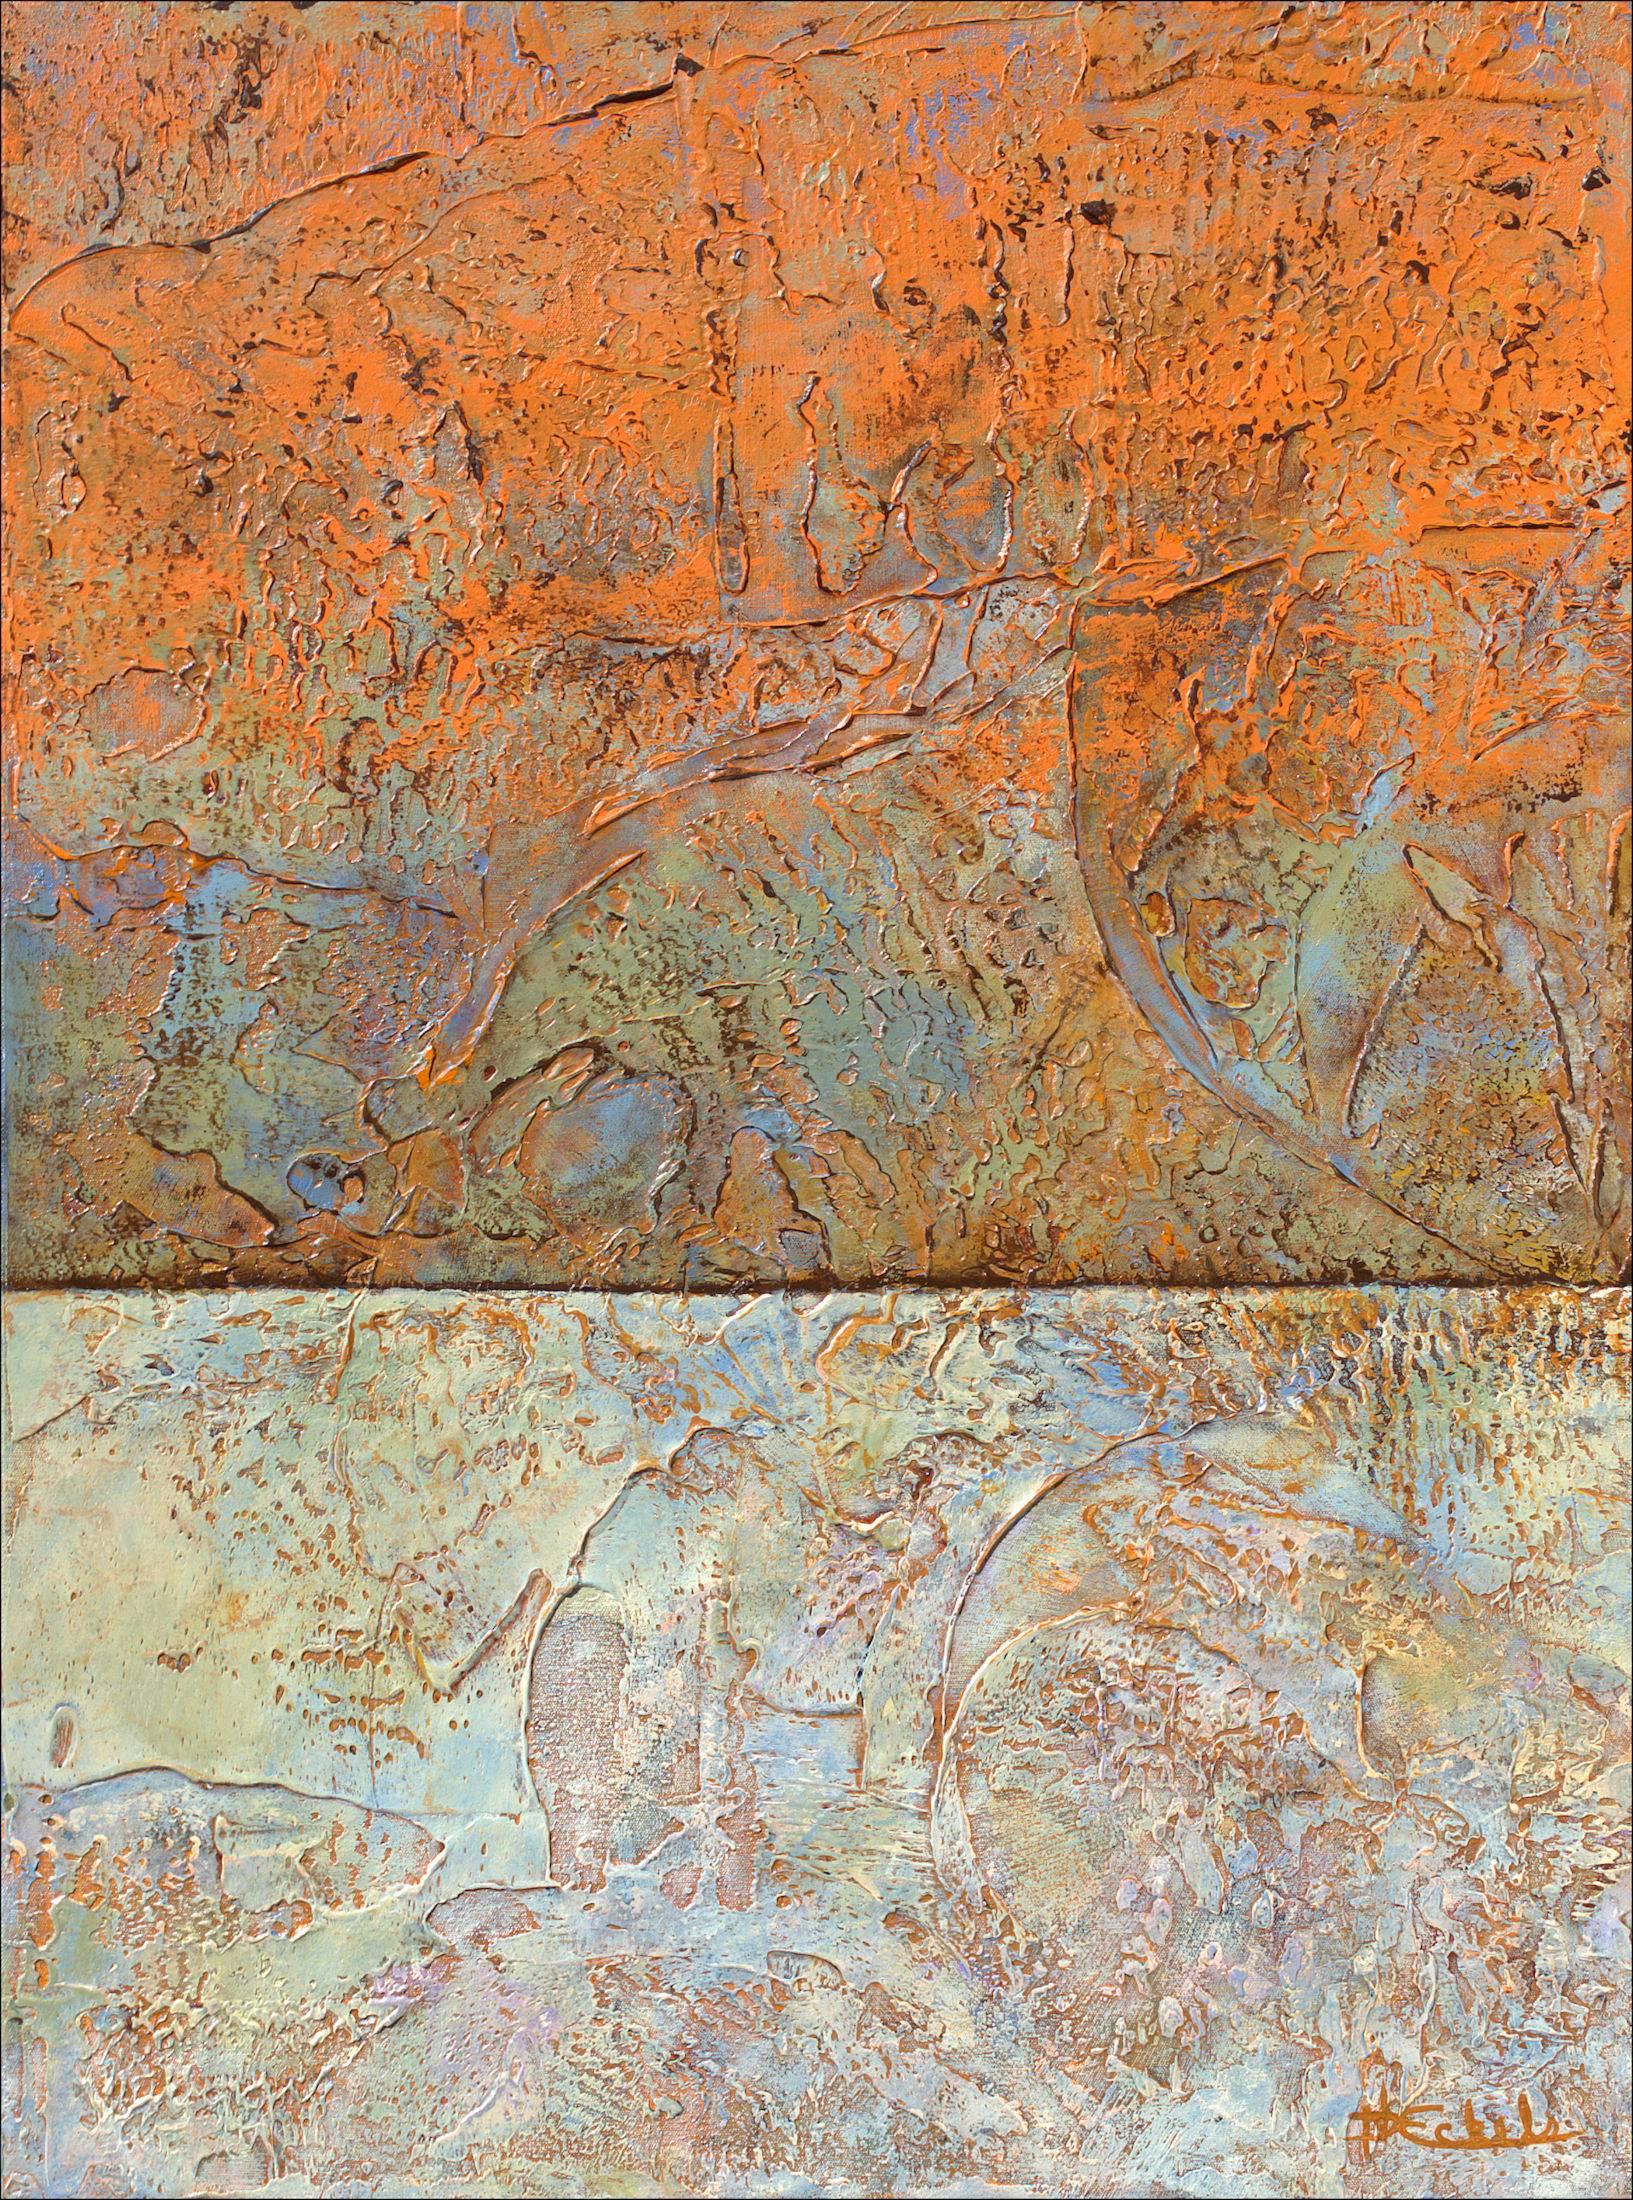 "Warming" by Nancy Eckels large abstract painting with textural oranges, pastels